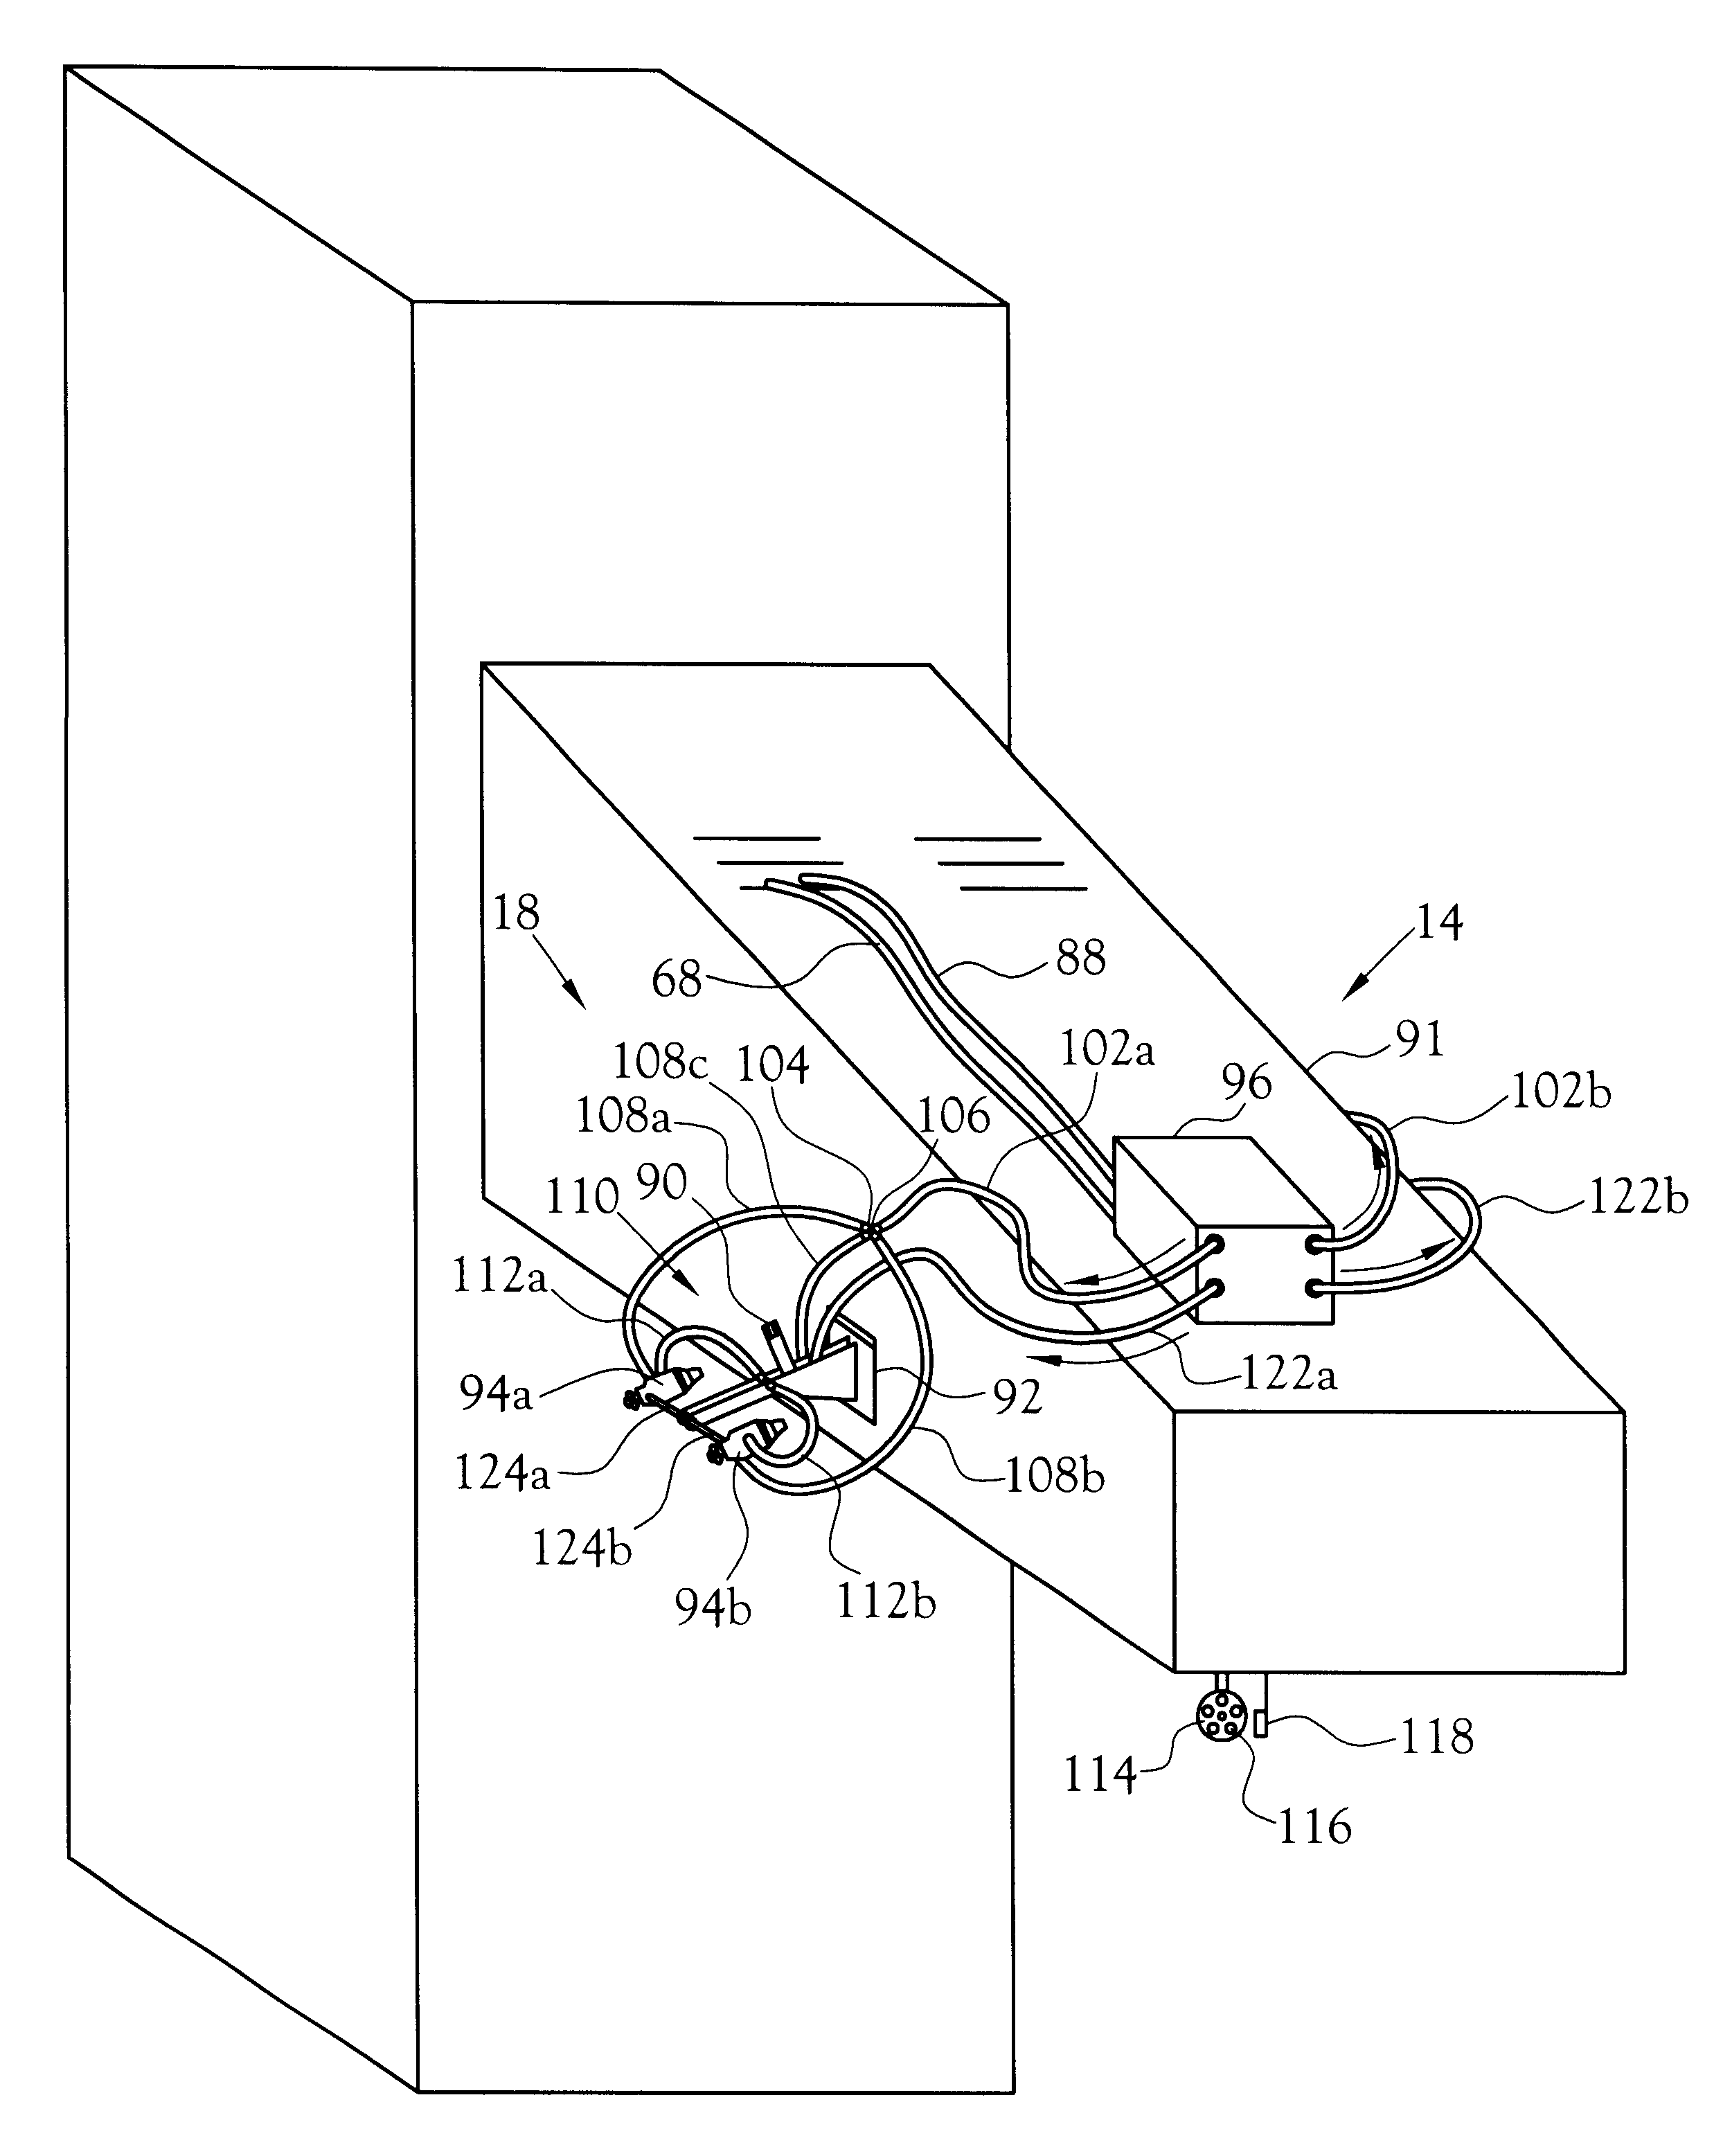 Method and apparatus for conditioning textile fibers